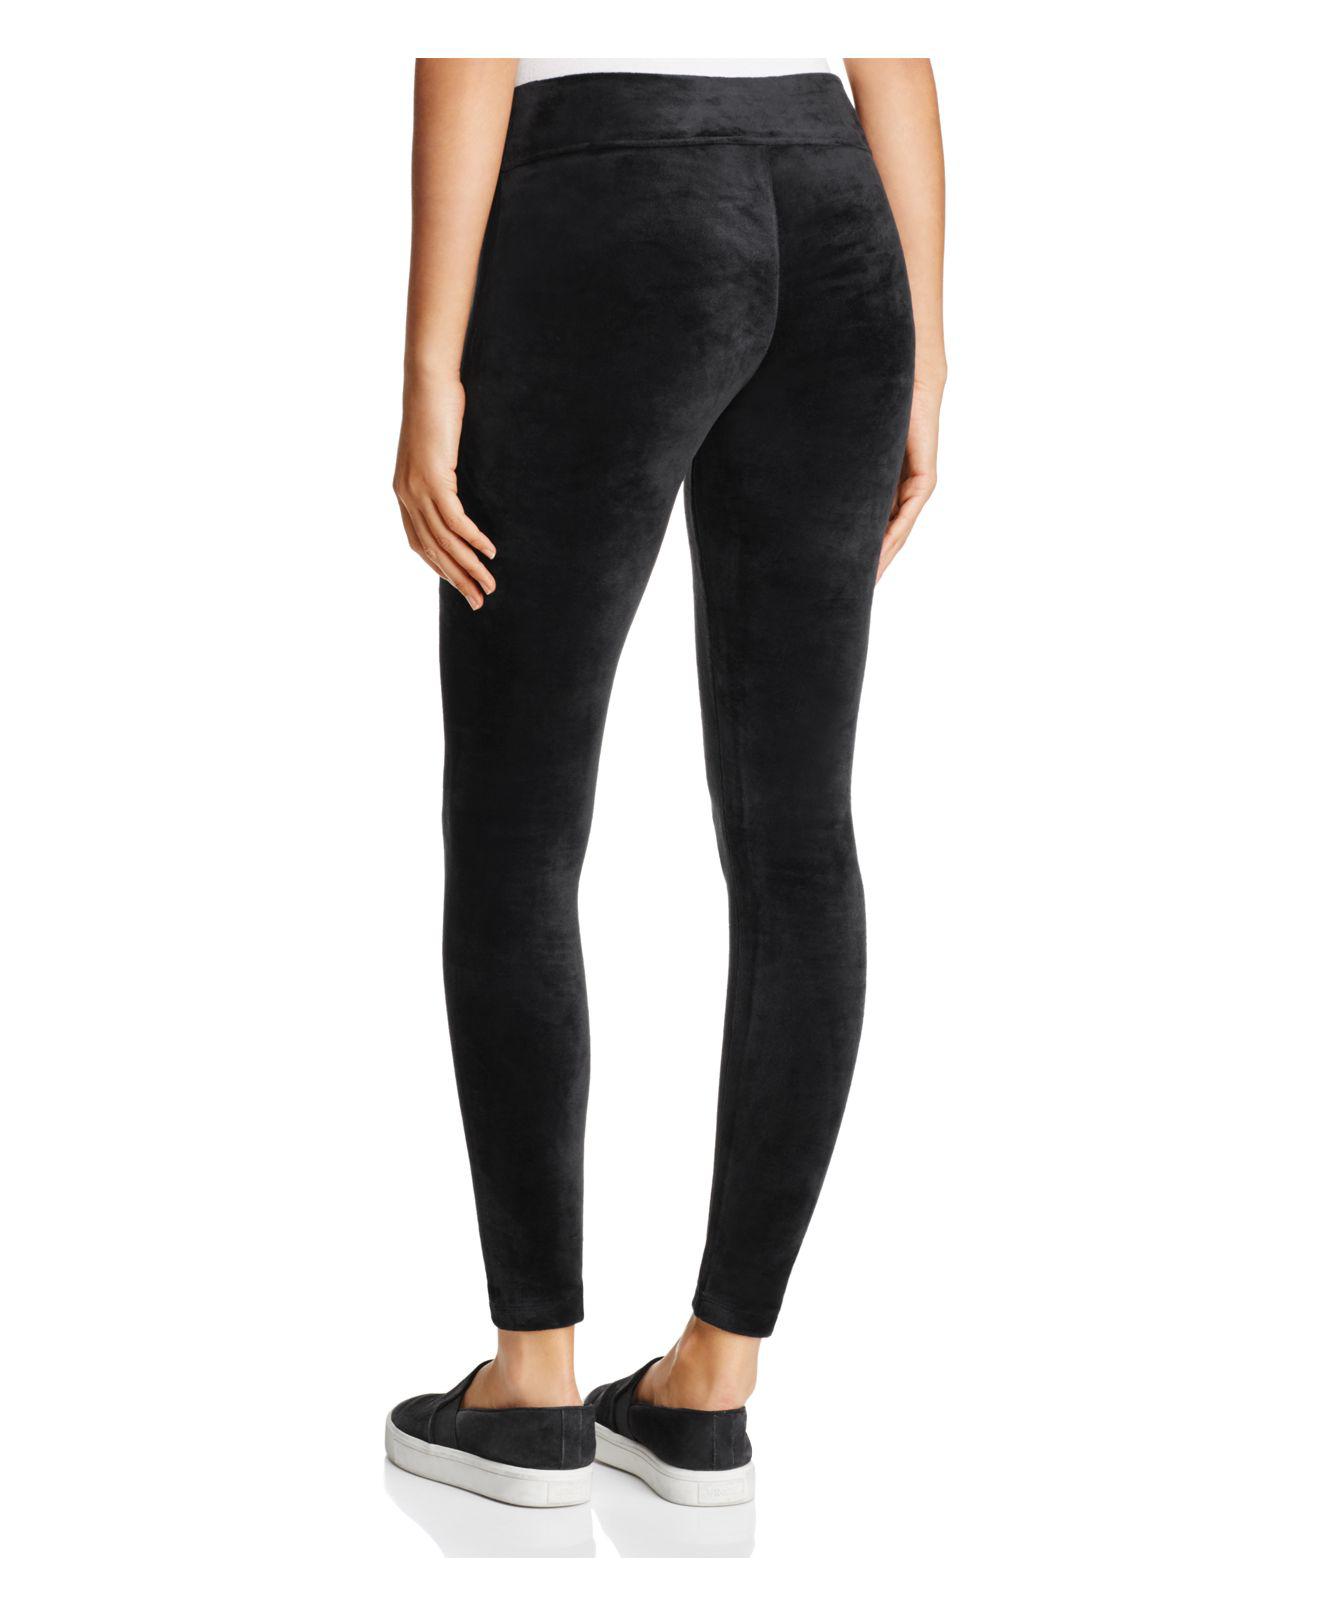 Skechers NWT! GoWalk Black High Waisted Pants Small - $42 - From Nicole